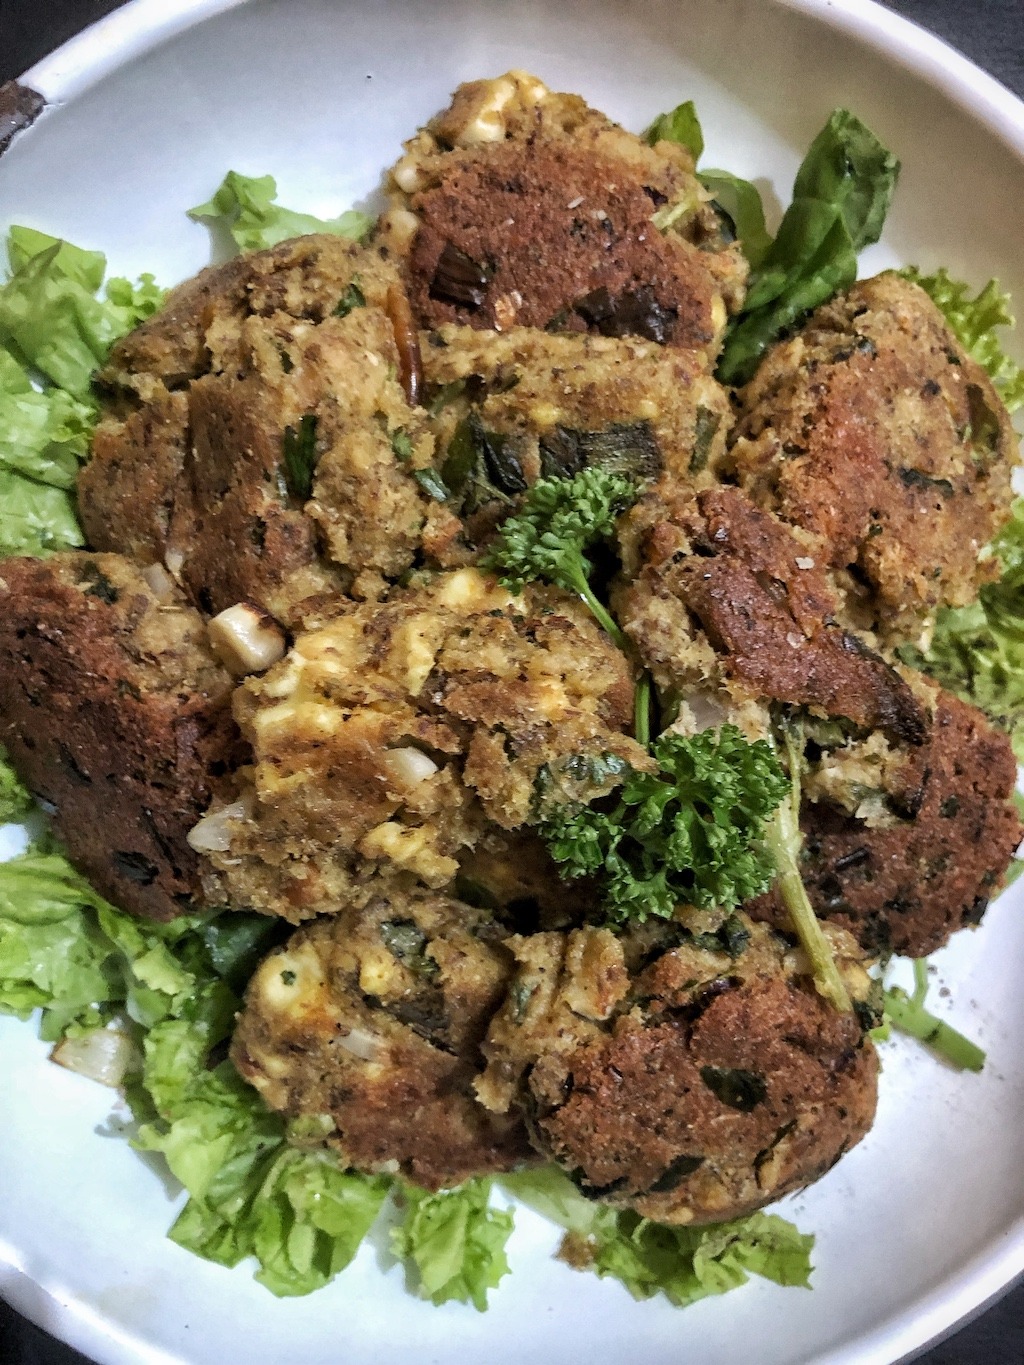 Canned Tuna Fish Cake - Healthy Keto Low Carb